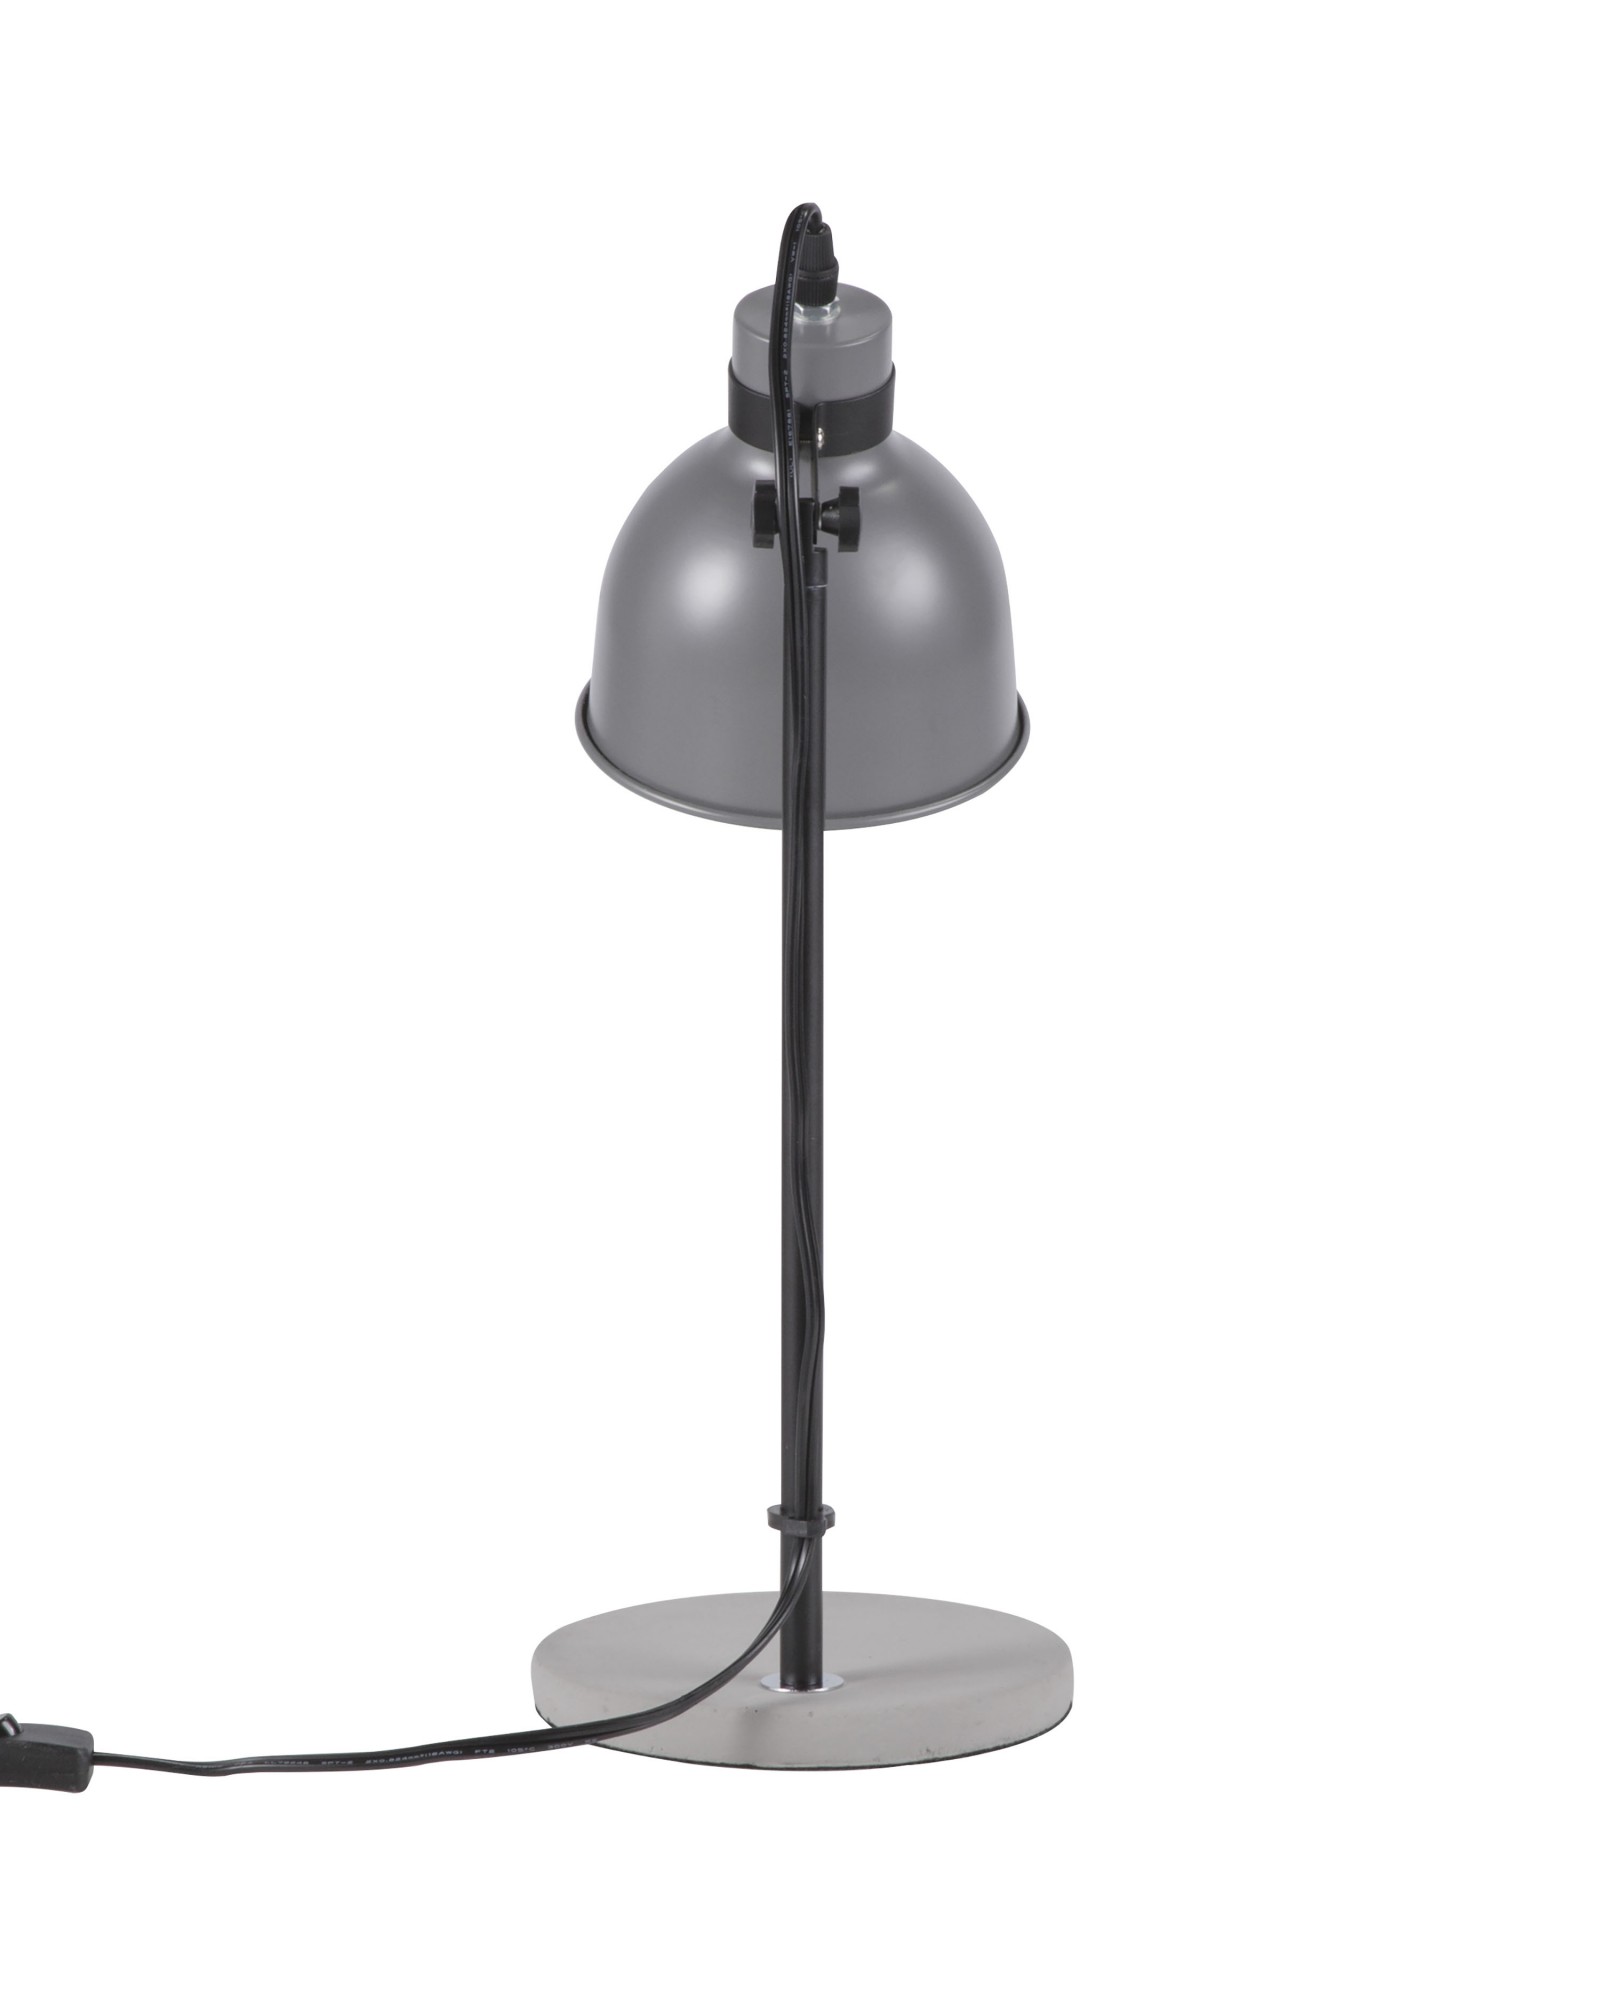 Concrete Industrial Table Lamp in Black and Grey